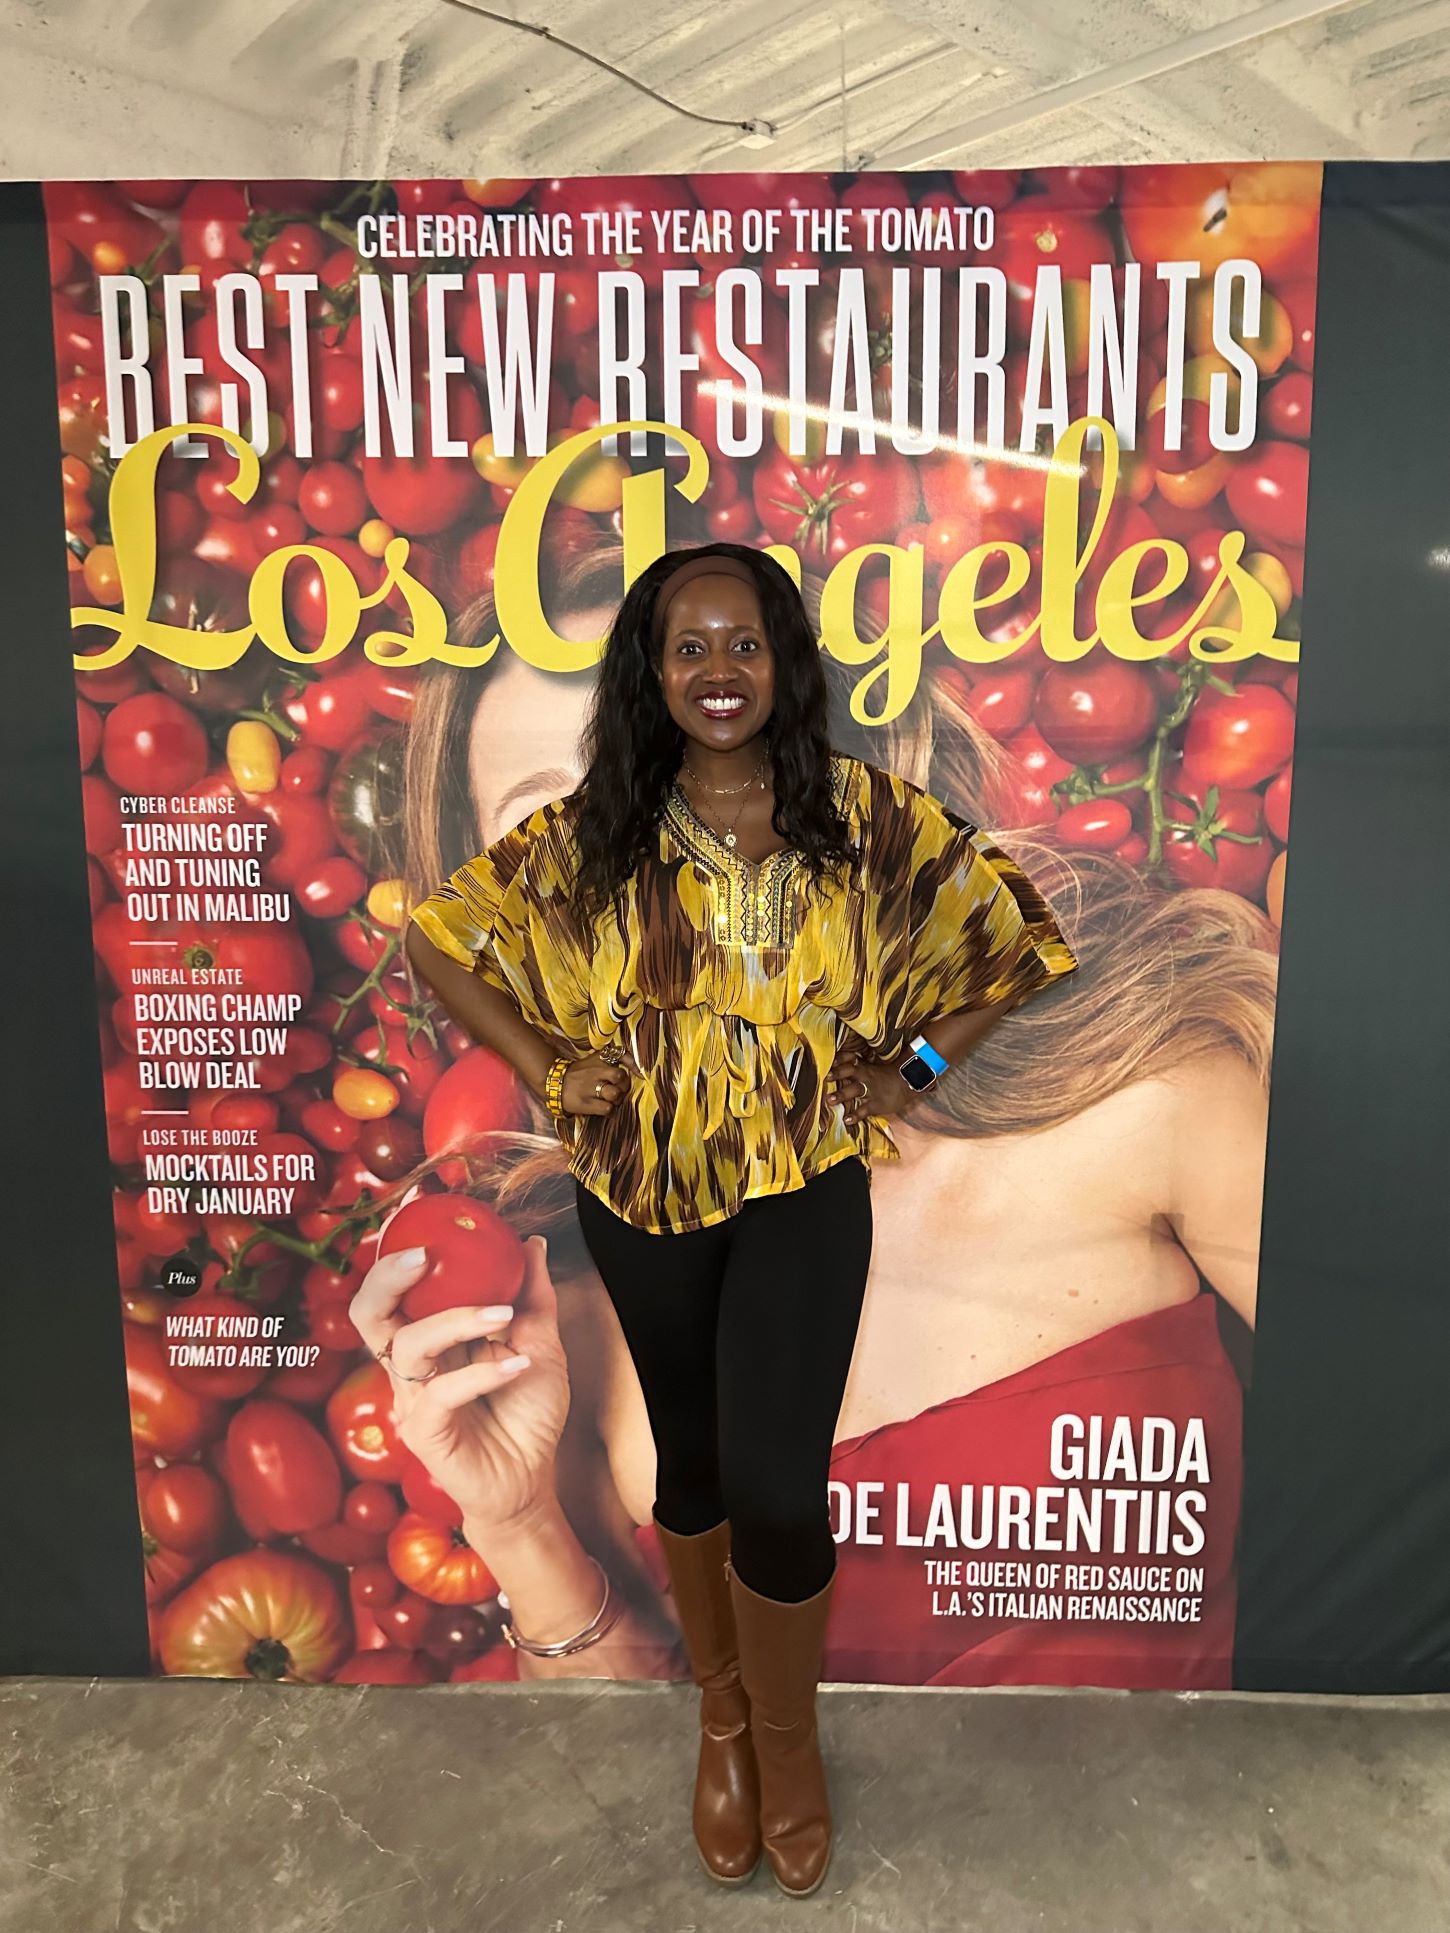 An image of lifestyle blogger Ariel at the Los Angeles Magazine Best New Restaurants celebration.